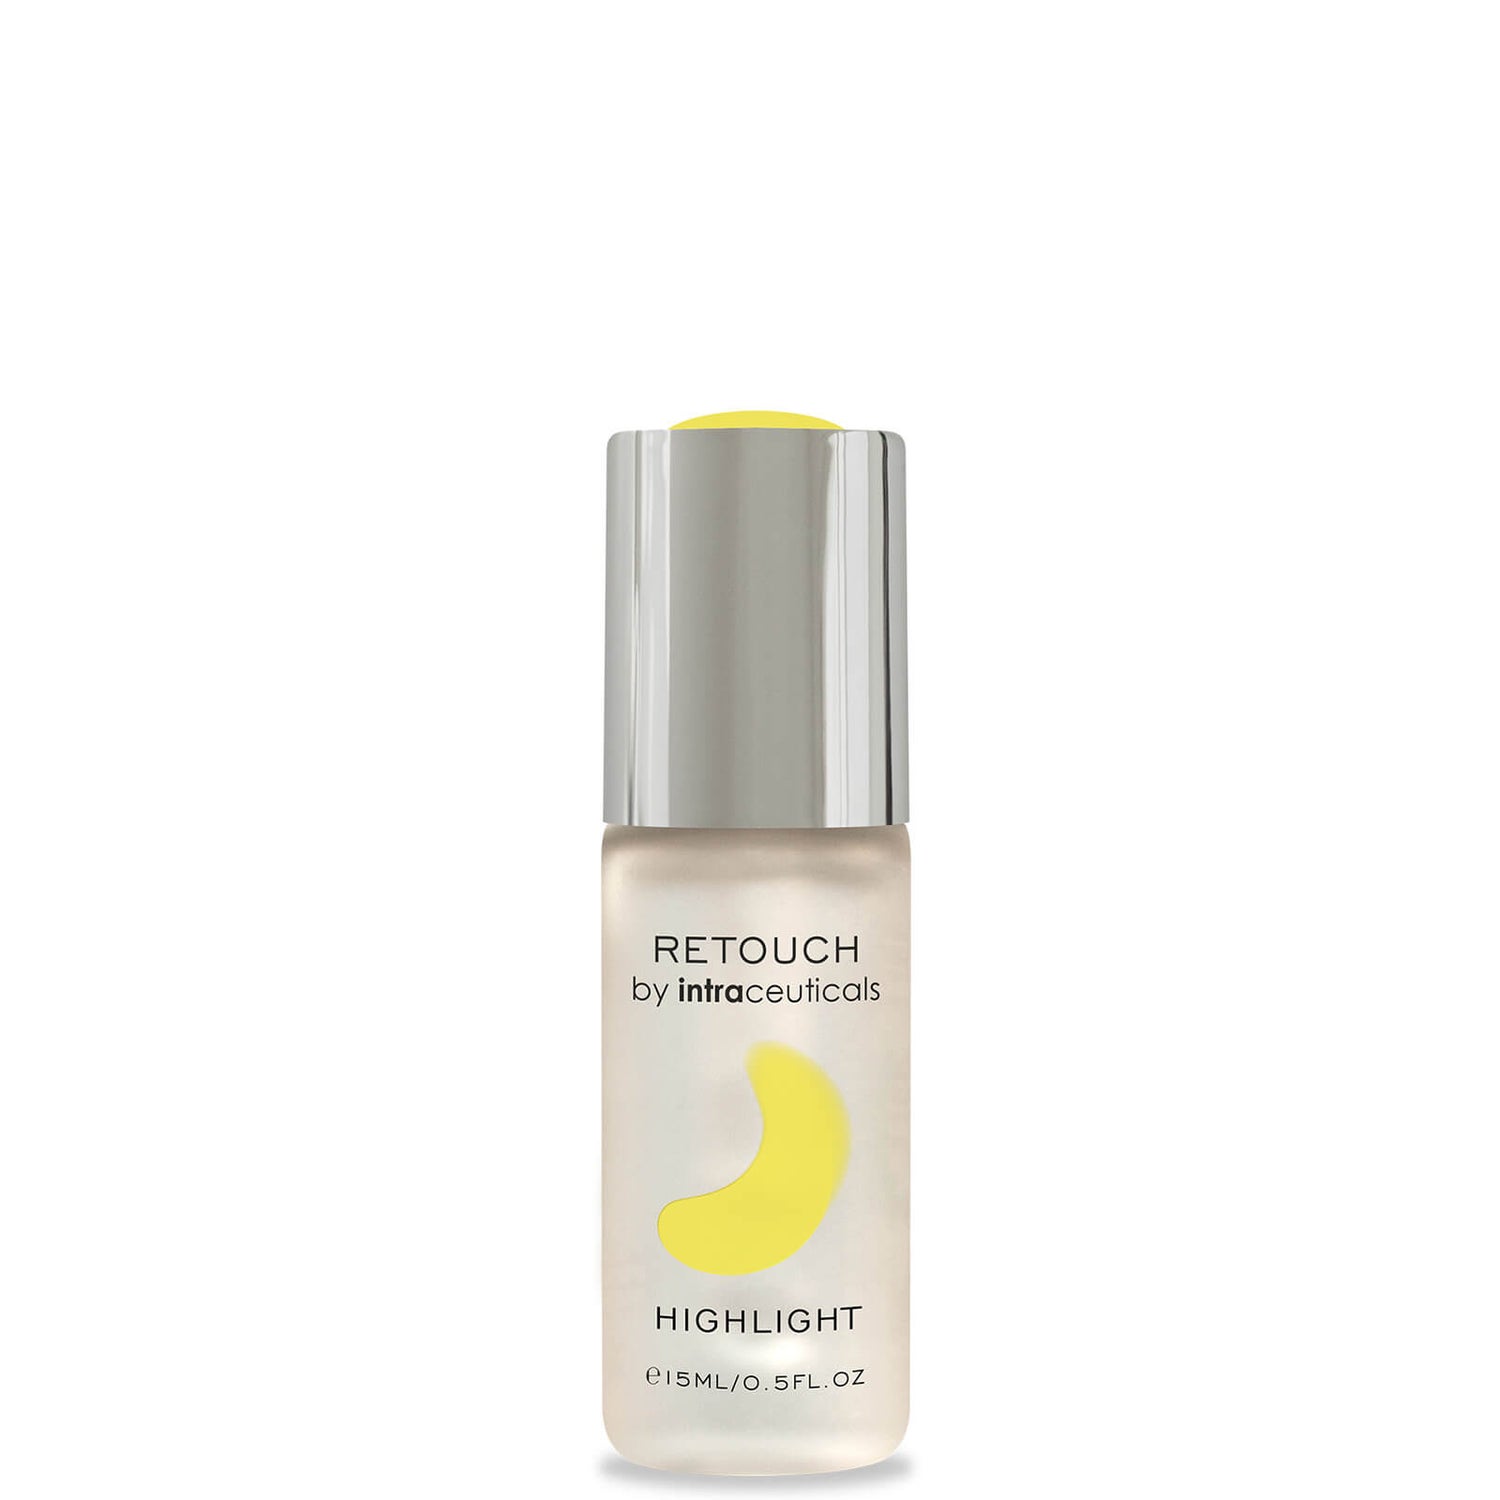 Intraceuticals Retouch Highlight 0.5 fl.oz